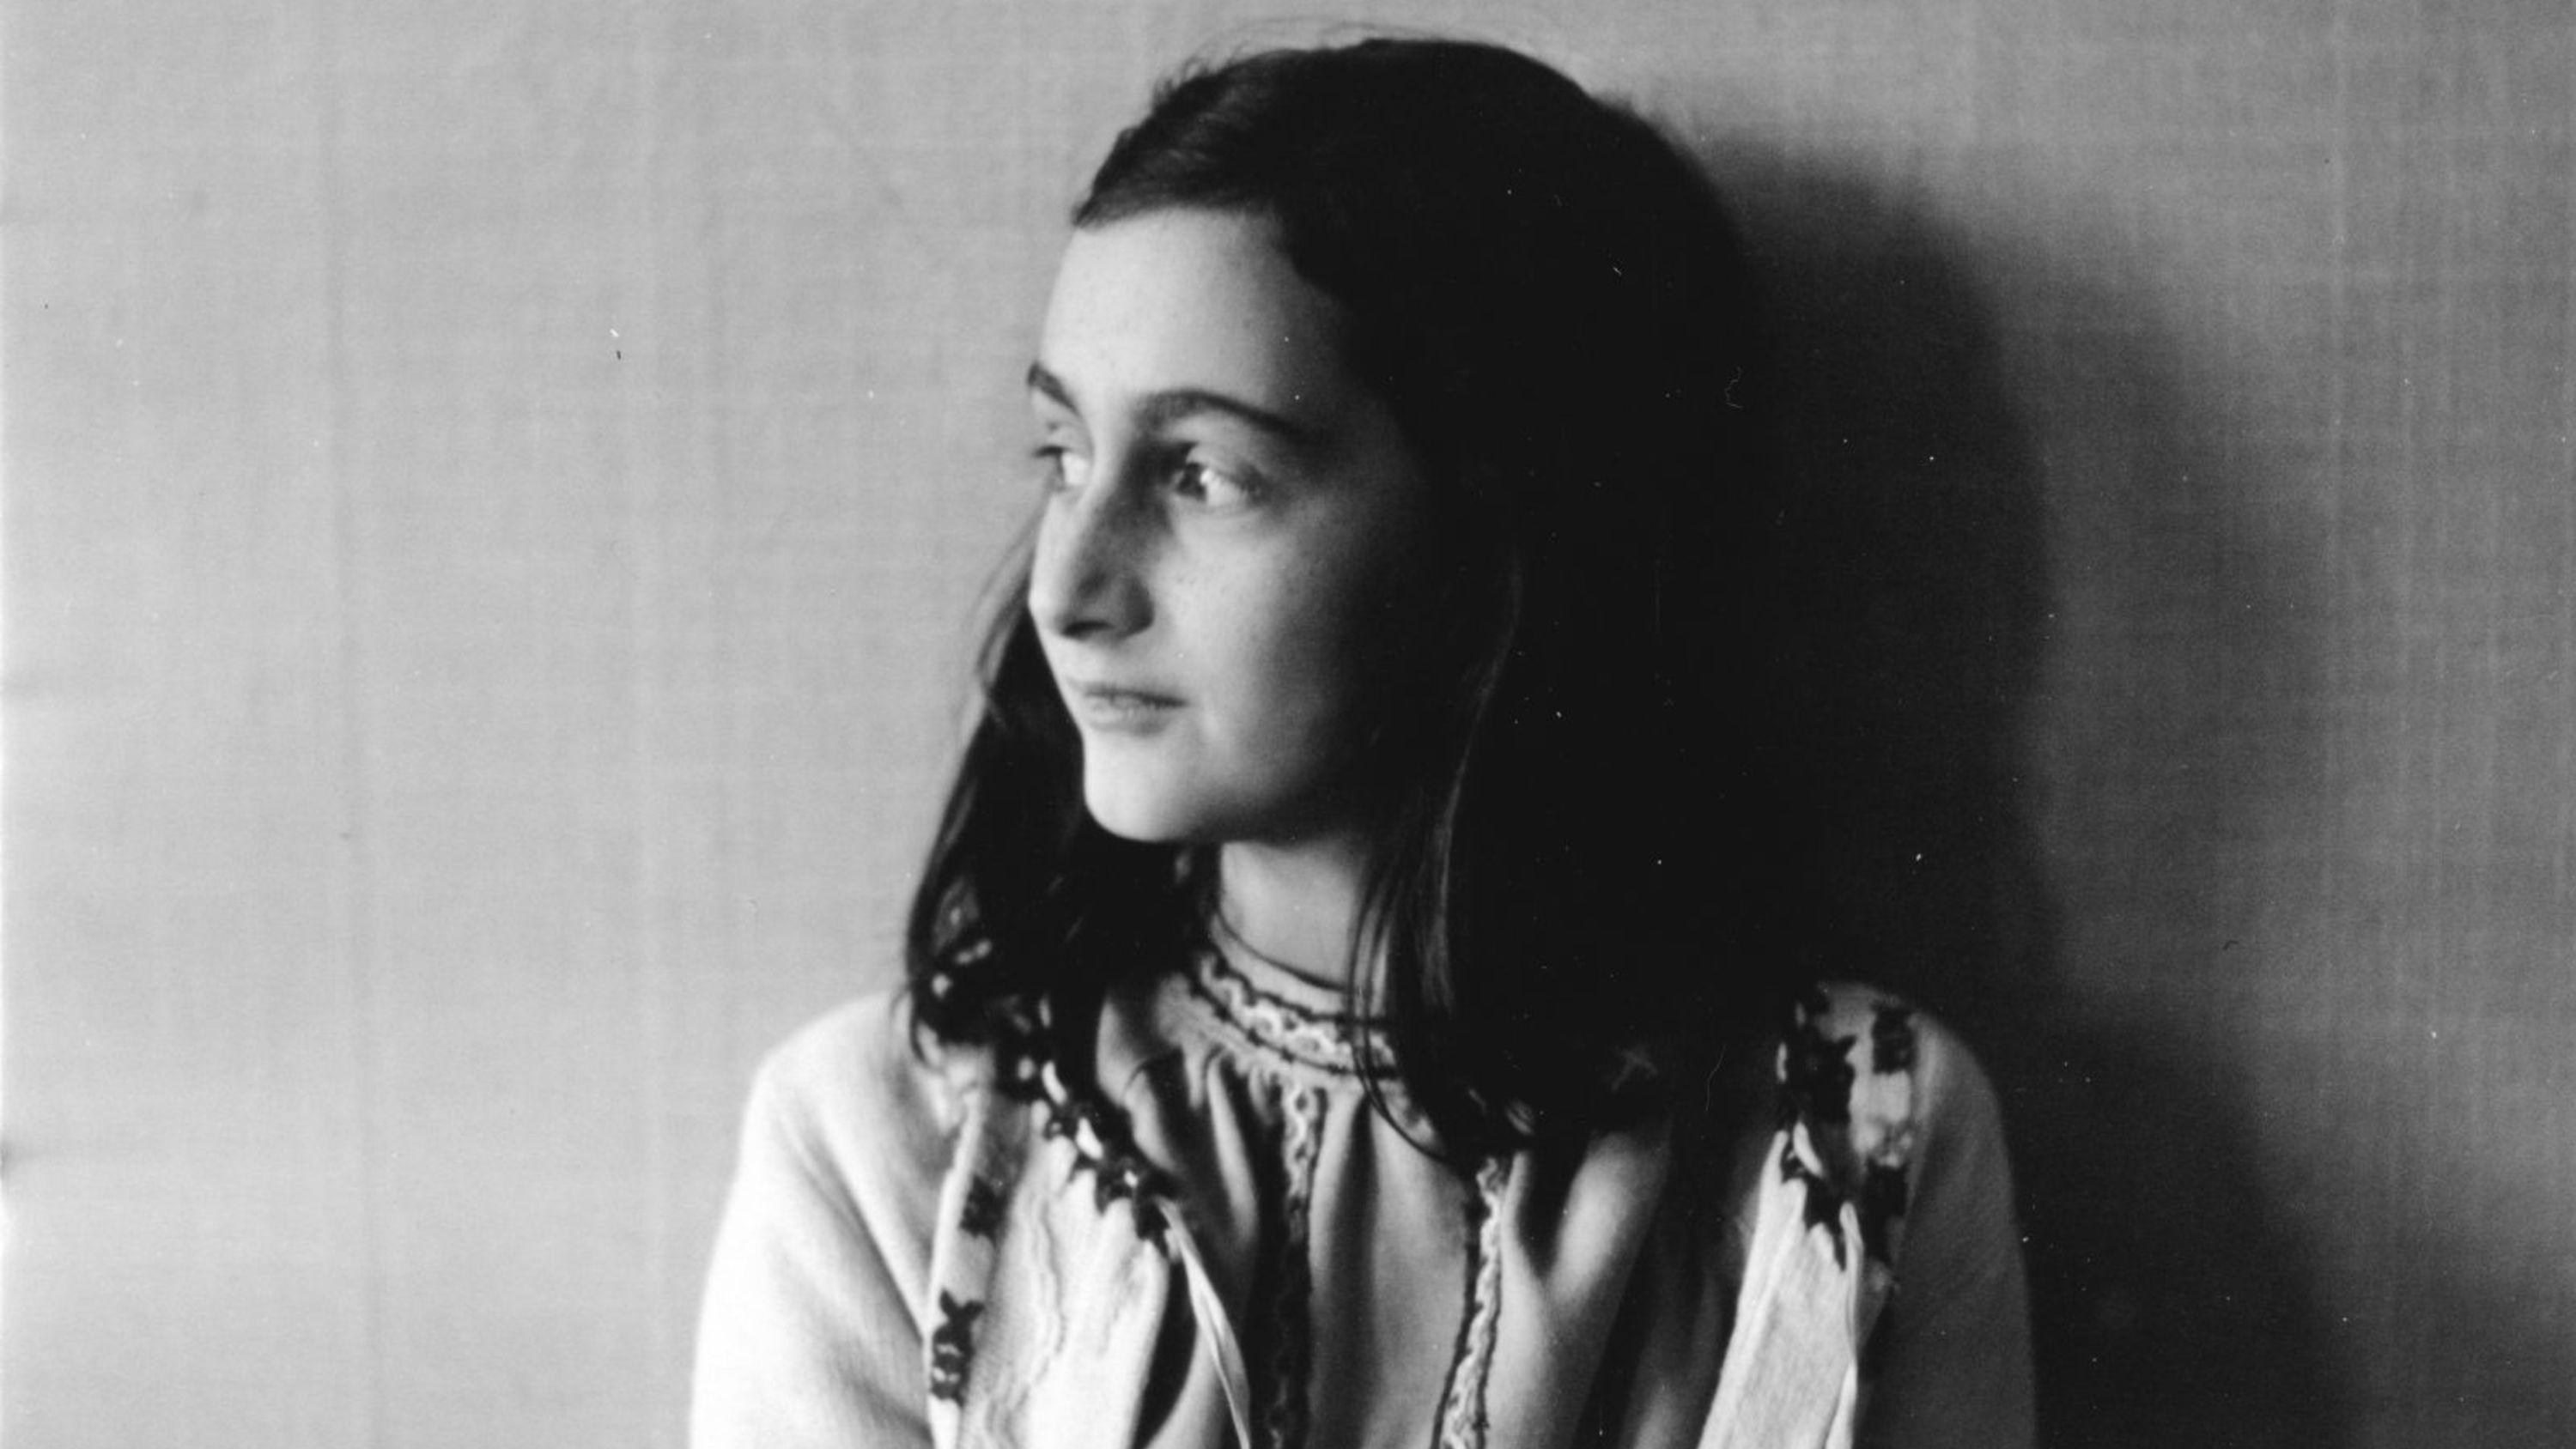 Anne Frank is pictured in 1941, the year before her family went into hiding in Nazi-occupied Amsterdam.